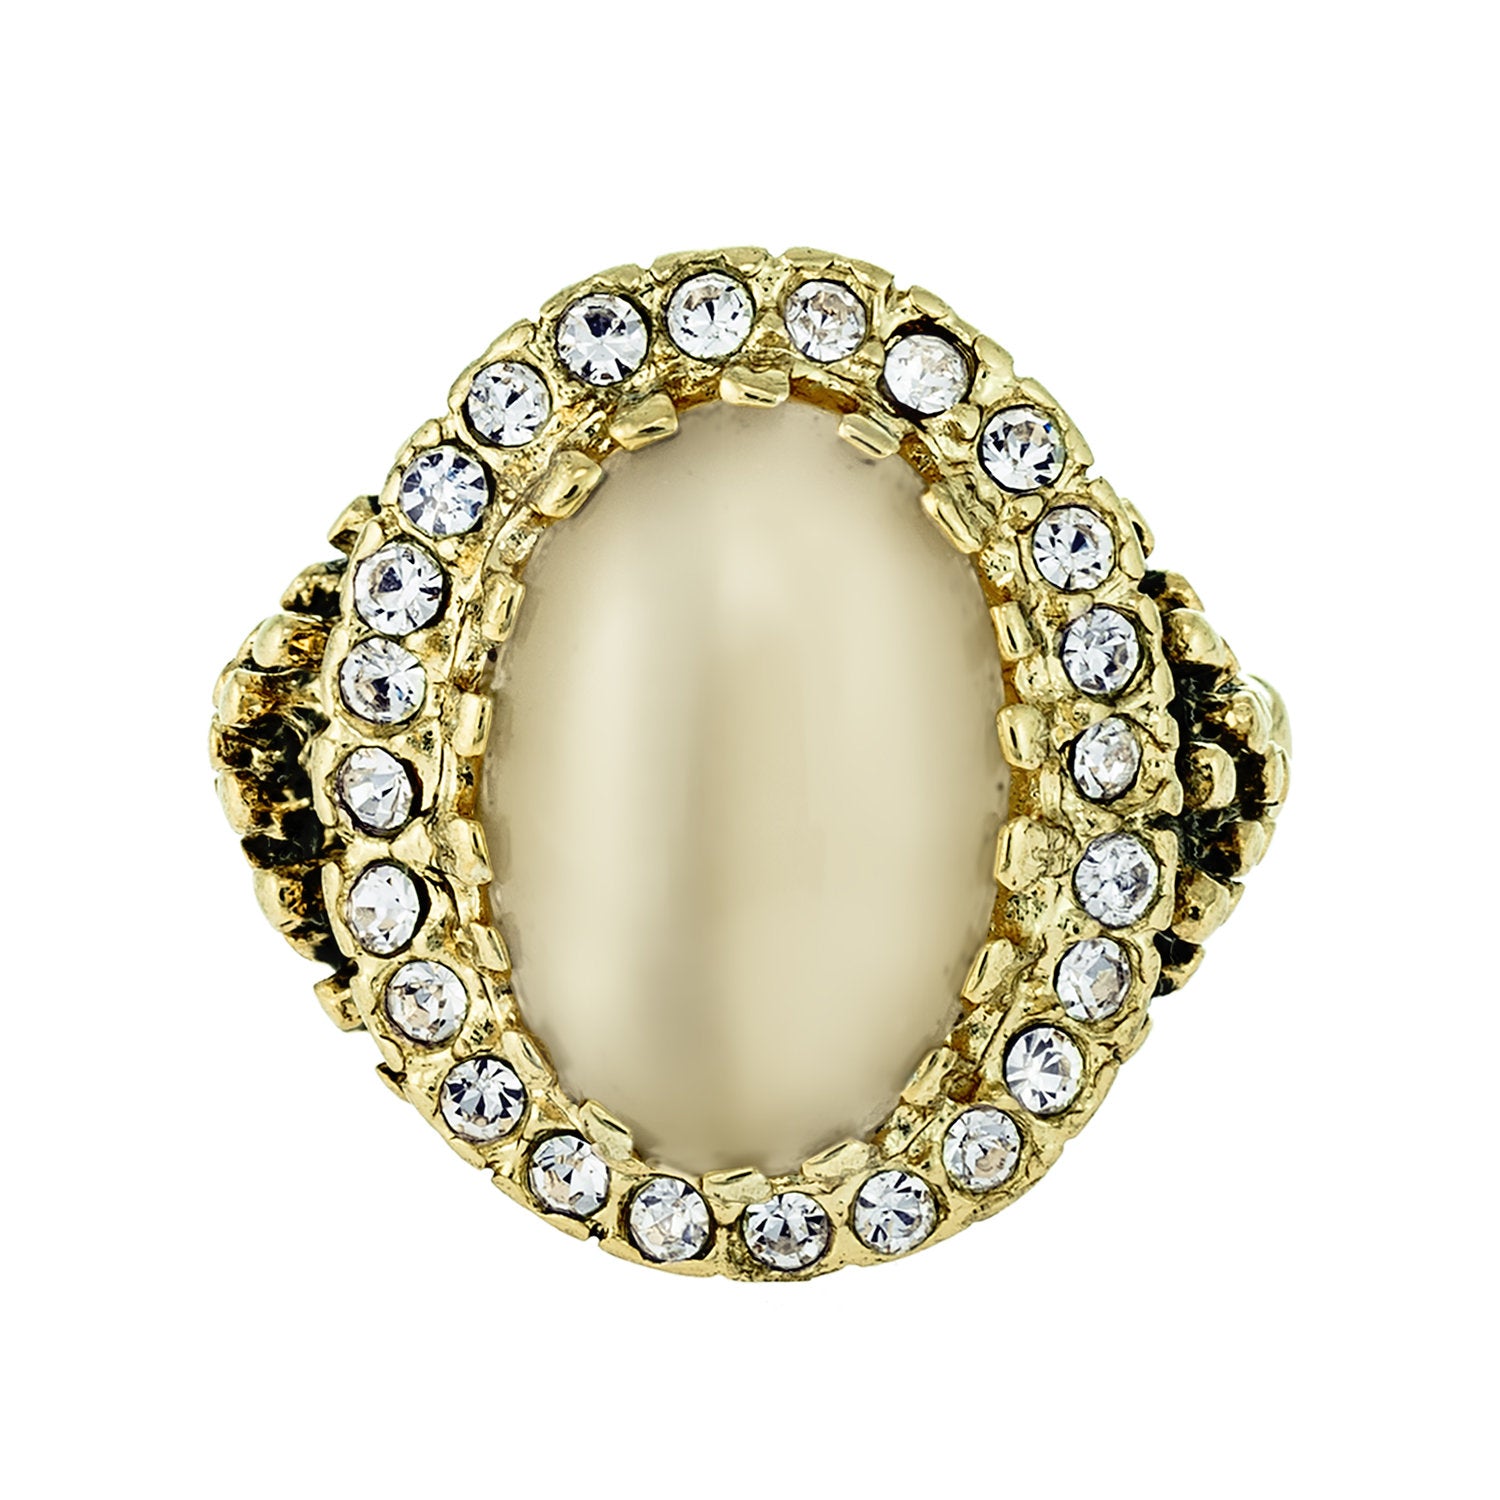 vintage-genuine-beige-moonstone-clear-Austrian-crystal-ring-edwardian-style-antique-yellow-gold-plated